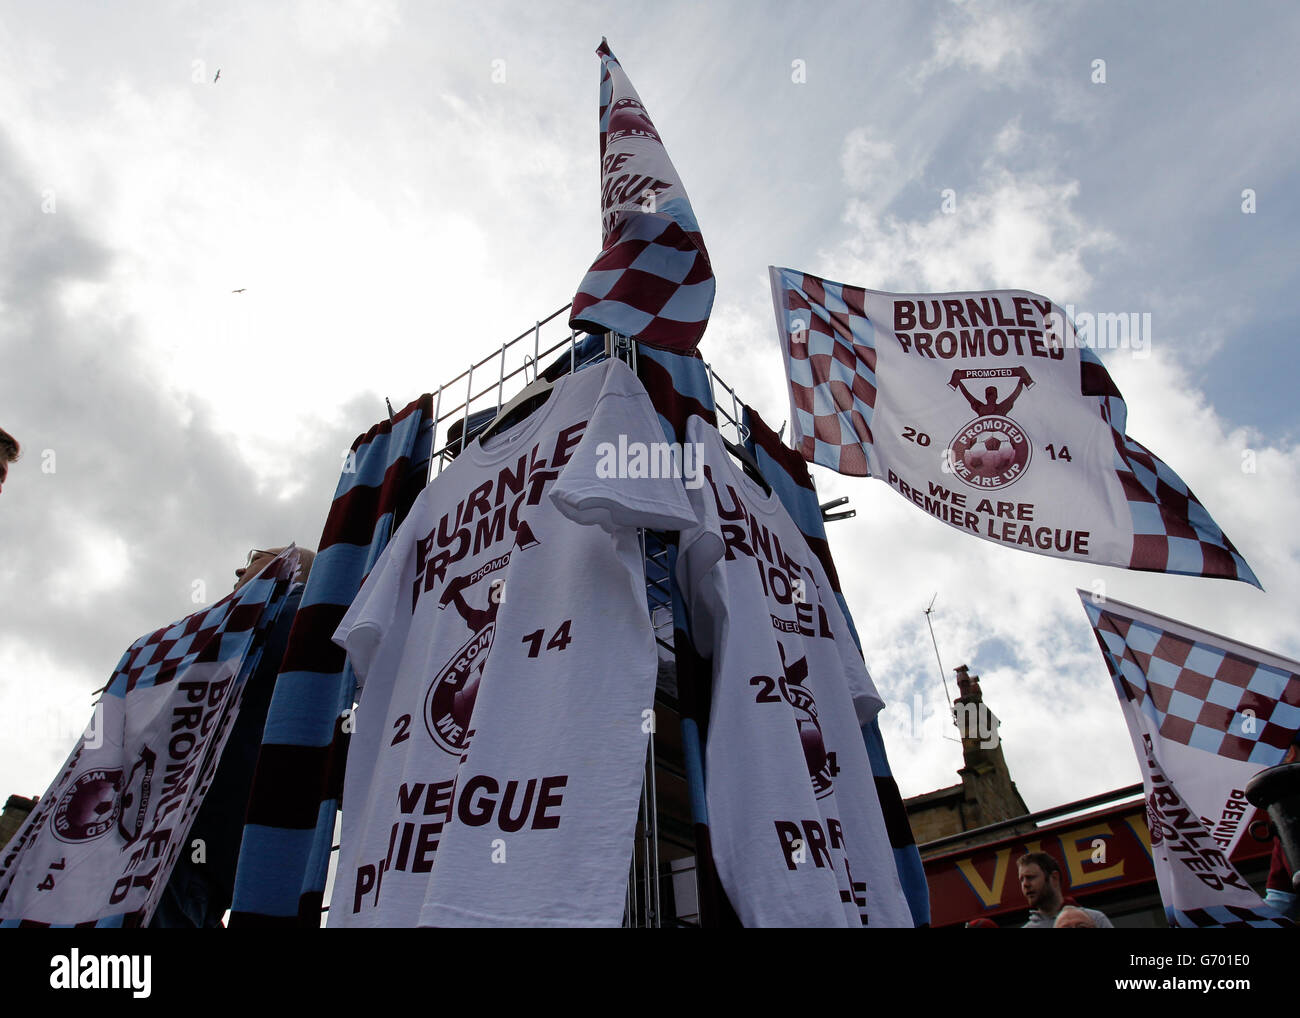 Burnley Promoted flags outside the stadium before the Burnley v Ipswich match at Turf Moor Stock Photo